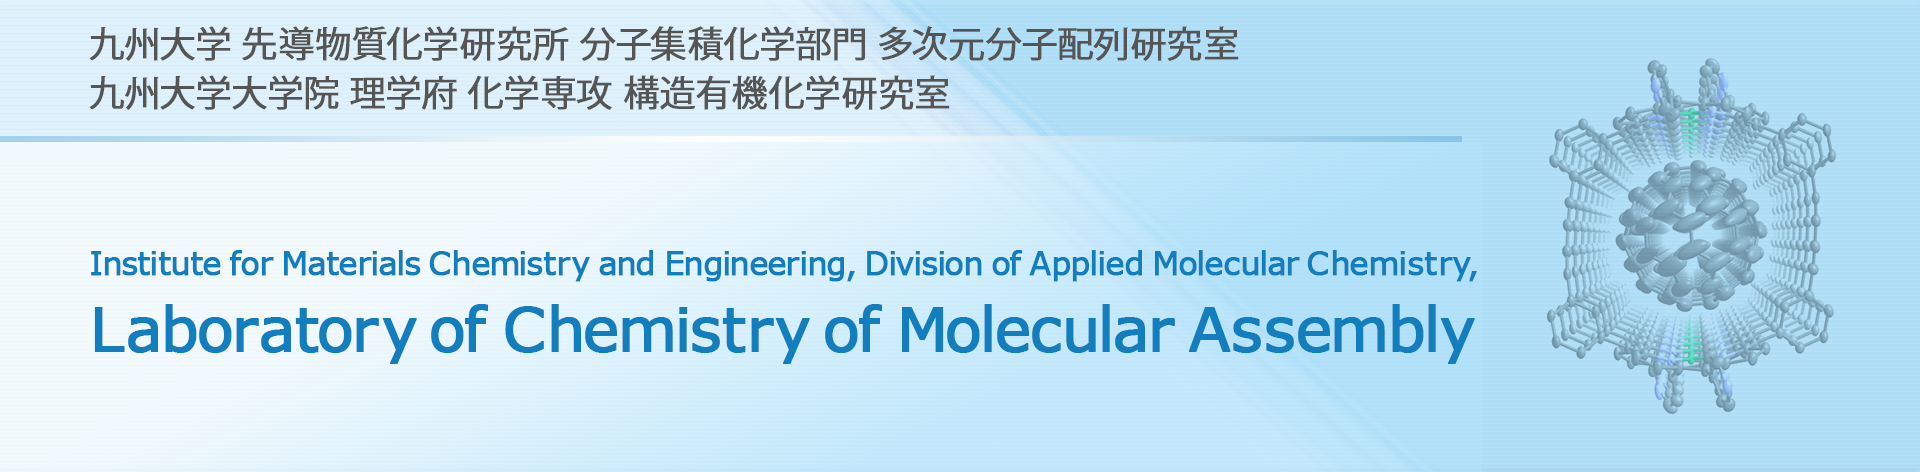 Institute for Materials Chemistry and Engineering, Division of Applied Molecular Chemistry, Laboratory of Chemistry of Molecular Assembly